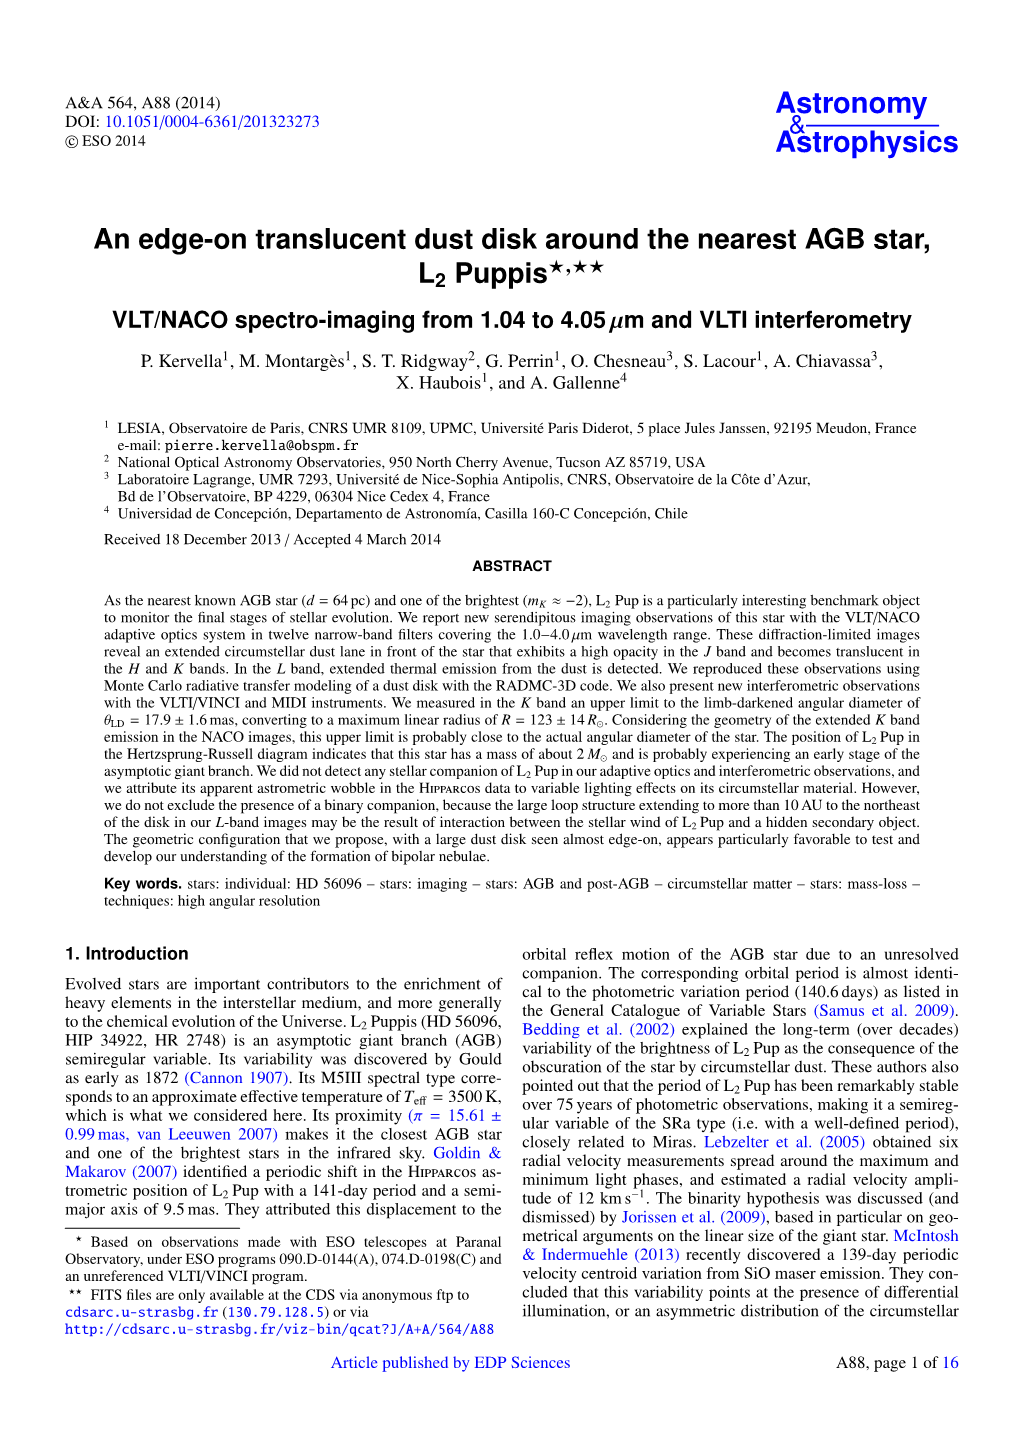 An Edge-On Translucent Dust Disk Around the Nearest AGB Star, ?,?? L2 Puppis VLT/NACO Spectro-Imaging from 1.04 to 4.05 Μm and VLTI Interferometry